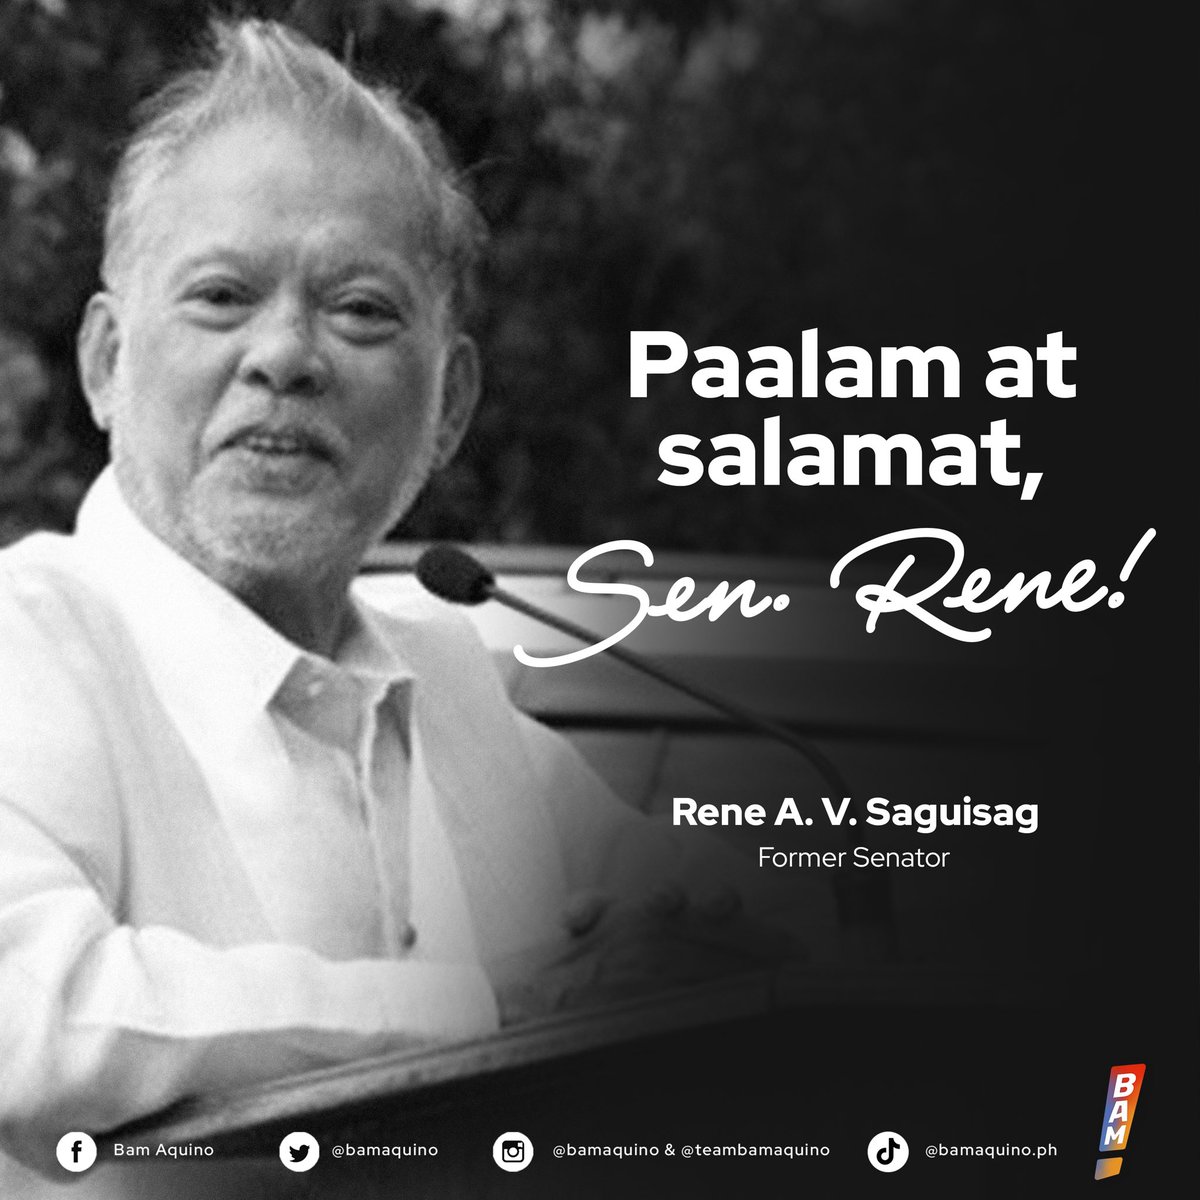 Rene Saguisag graced the Senate with his brilliance and unwavering love for country. Noong Senador siya, the Senate was a beacon of excellence. He’s known to be a master orator, an excellent writer, and exemplary public servant - totoong ehemplo ng katapangan at kahusayan. Ang…